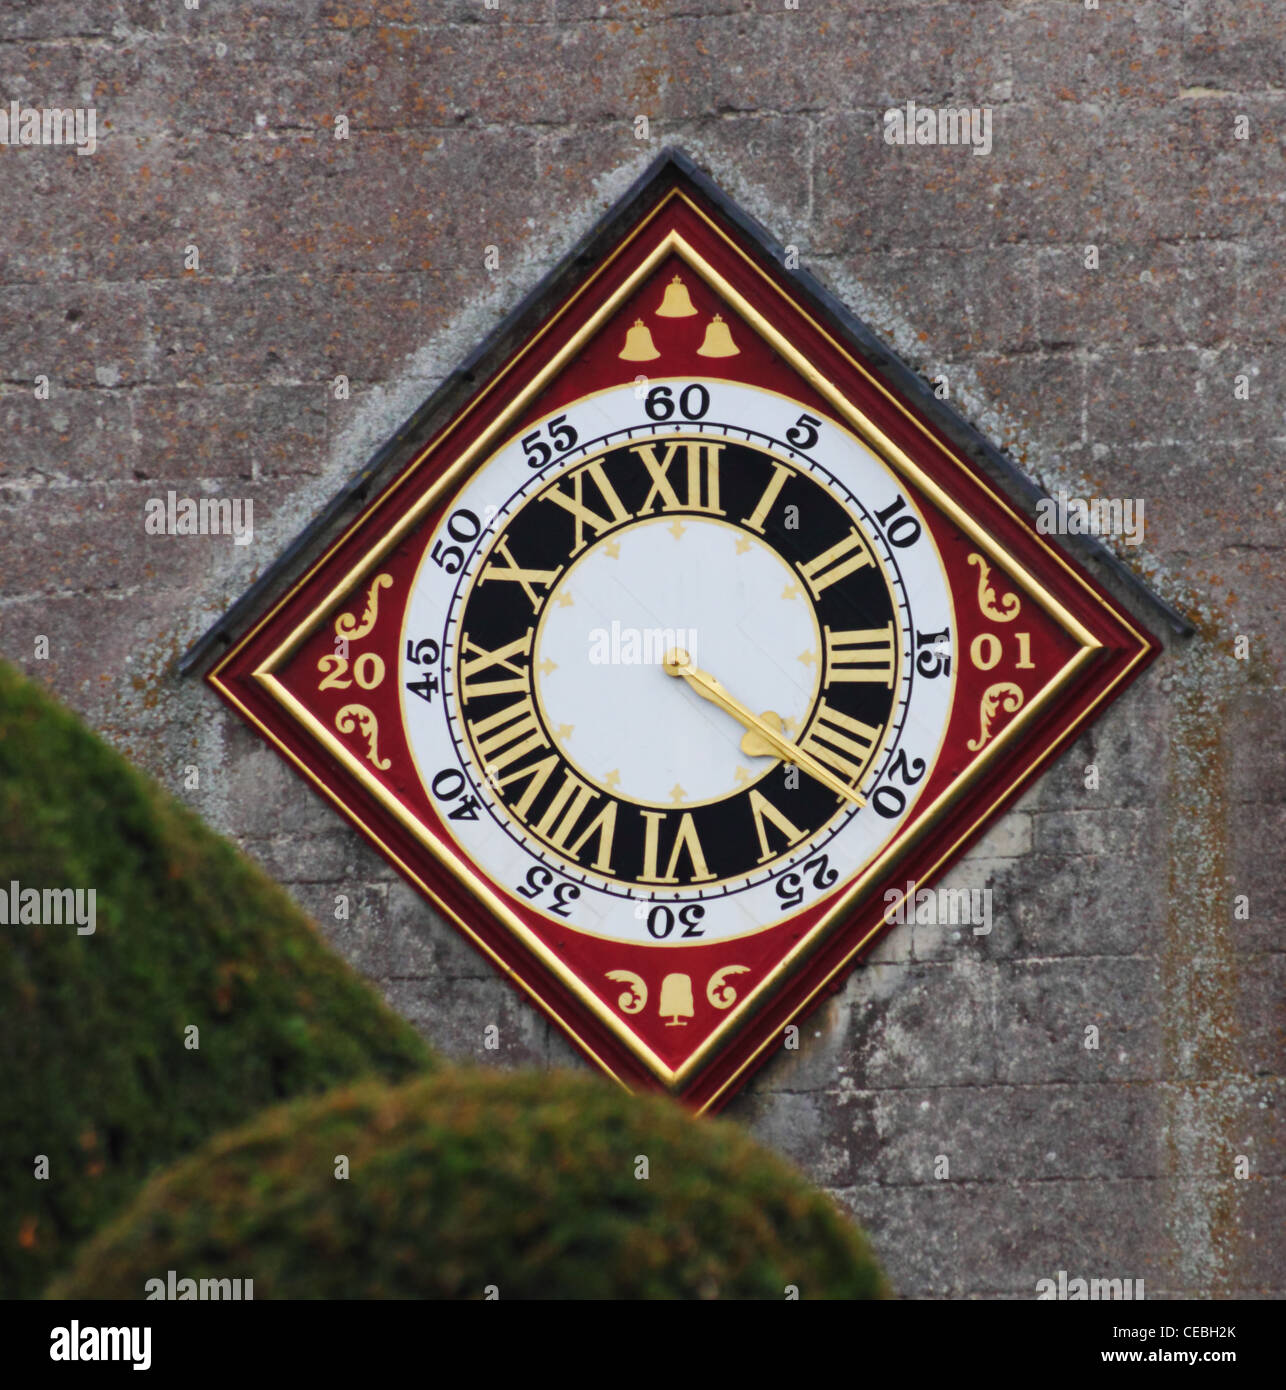 Church clock, St Mary's, Painswick, Gloucestershire.  Restored in 2001, with Yew tree emblem. Stock Photo